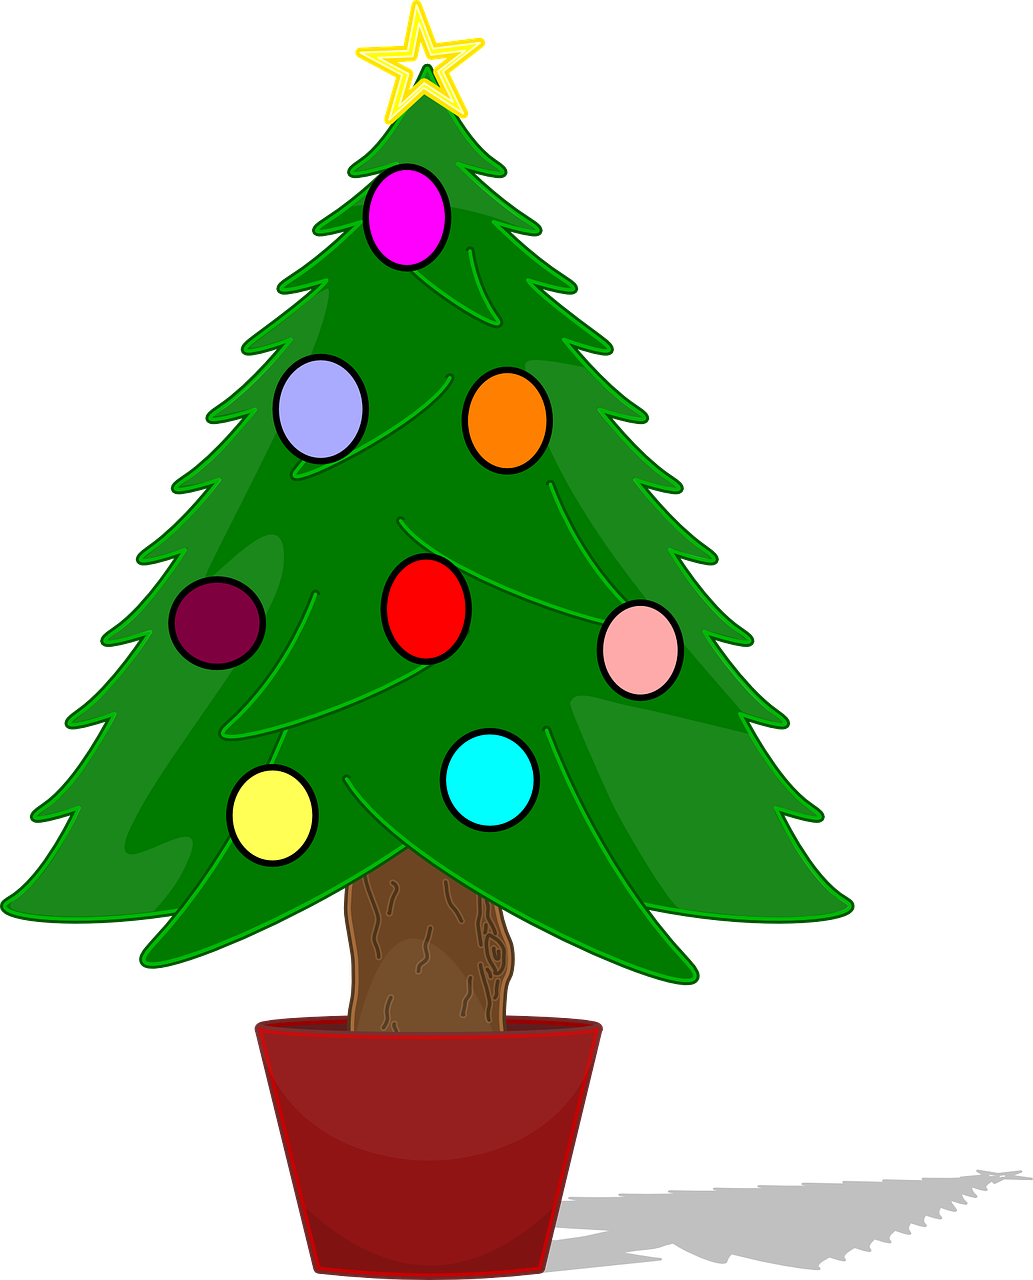 a christmas tree with a star on top, an illustration of, naive art, shoulder level shot, the background is black, large potted plant, colorful image